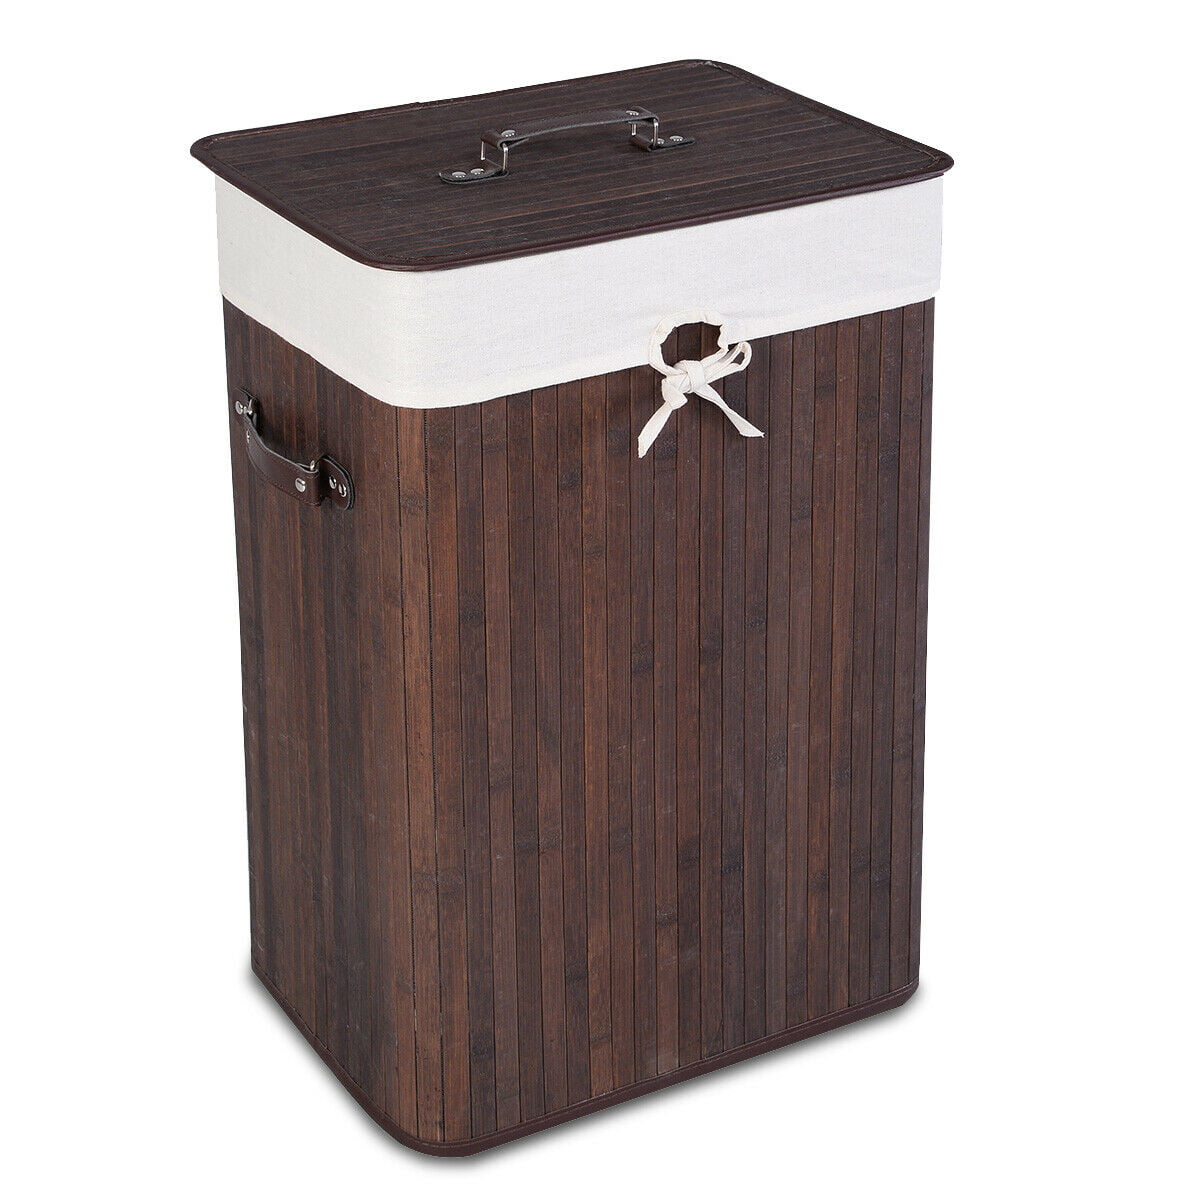 Details about   Rectangle Bamboo Hamper Laundry Basket 